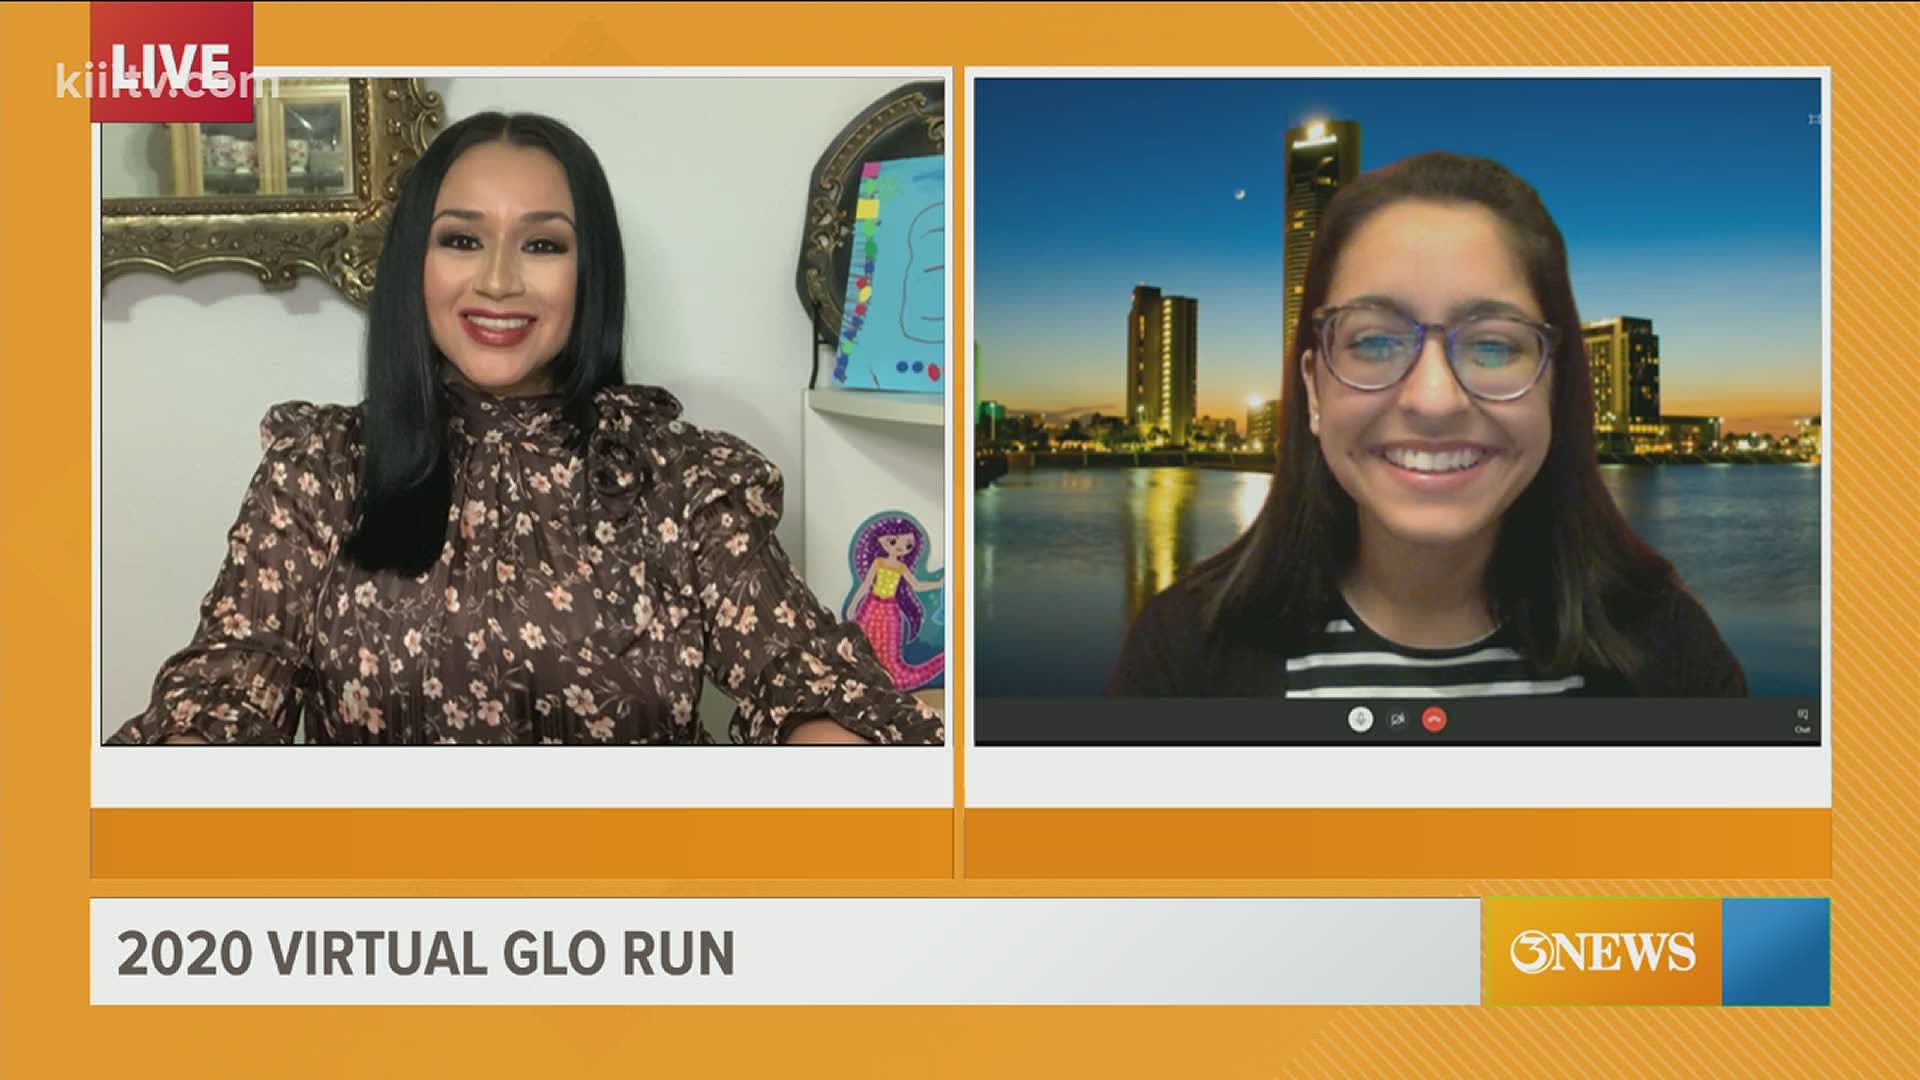 Zoya Surani joins 3news First Edition live to talk about the It's Your Life Foundation 2020 Glo Run that will take place from Oct. 25-31.